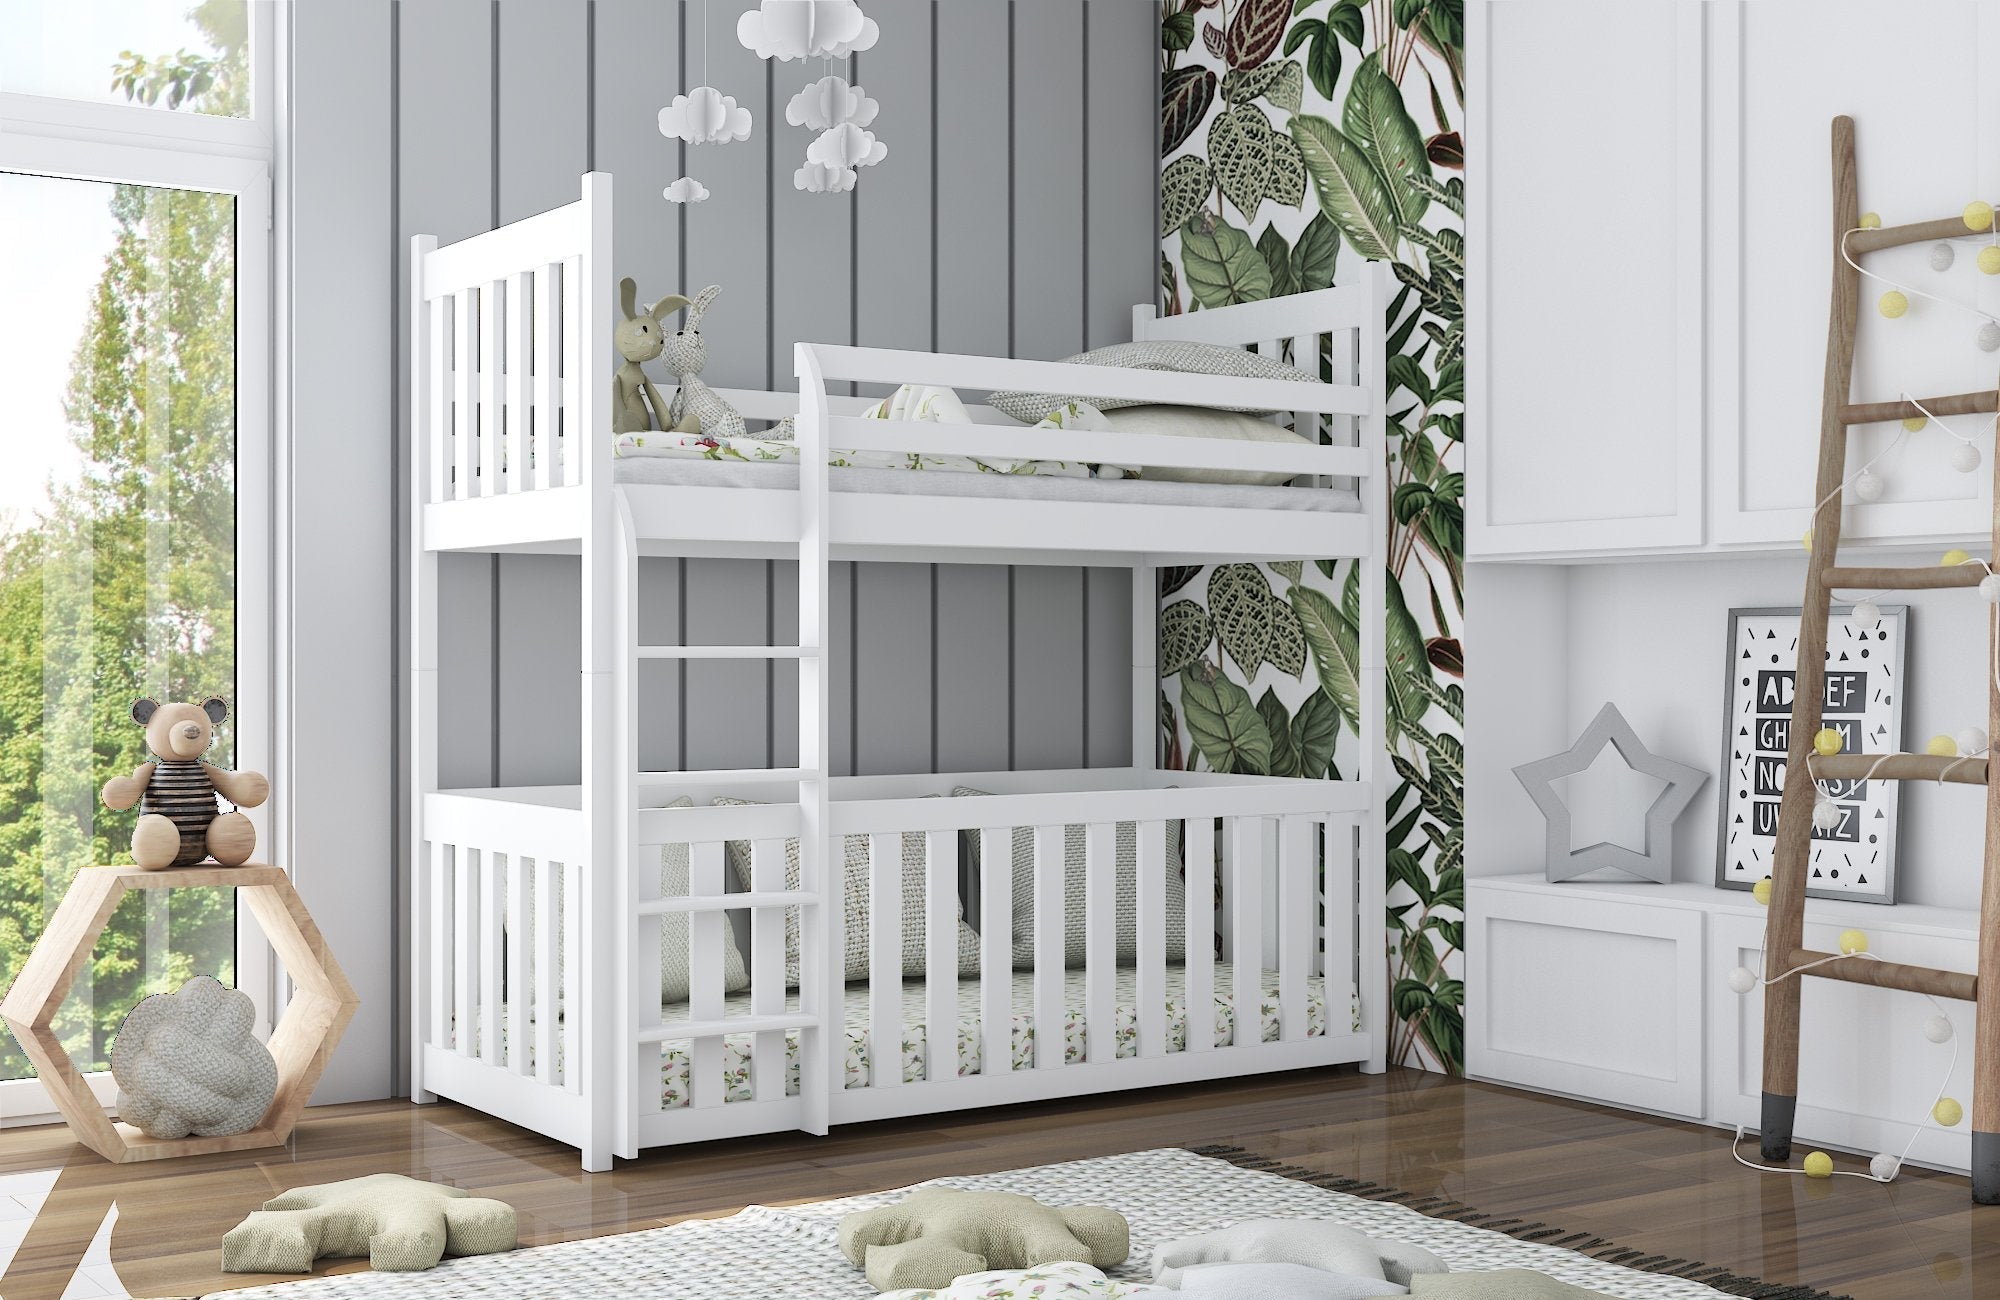 View Wooden Bunk Bed Cris with Cot Bed White Matt Bonnell Mattresses information